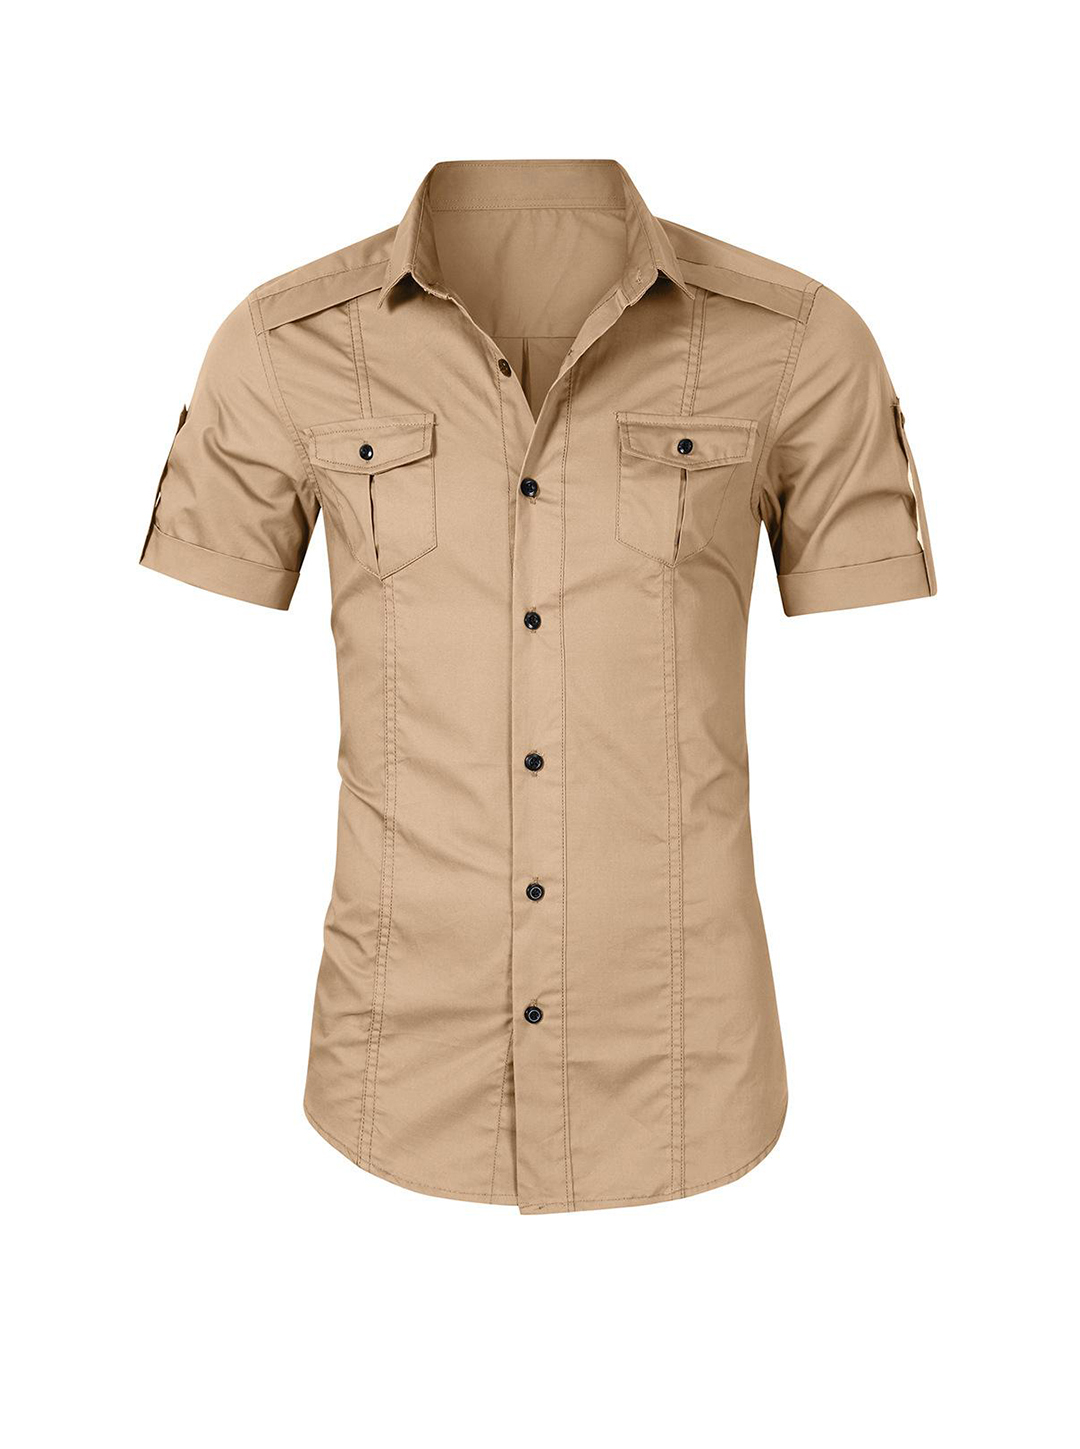 Andres Outdoor Double Pocket Short Sleeve Shirt